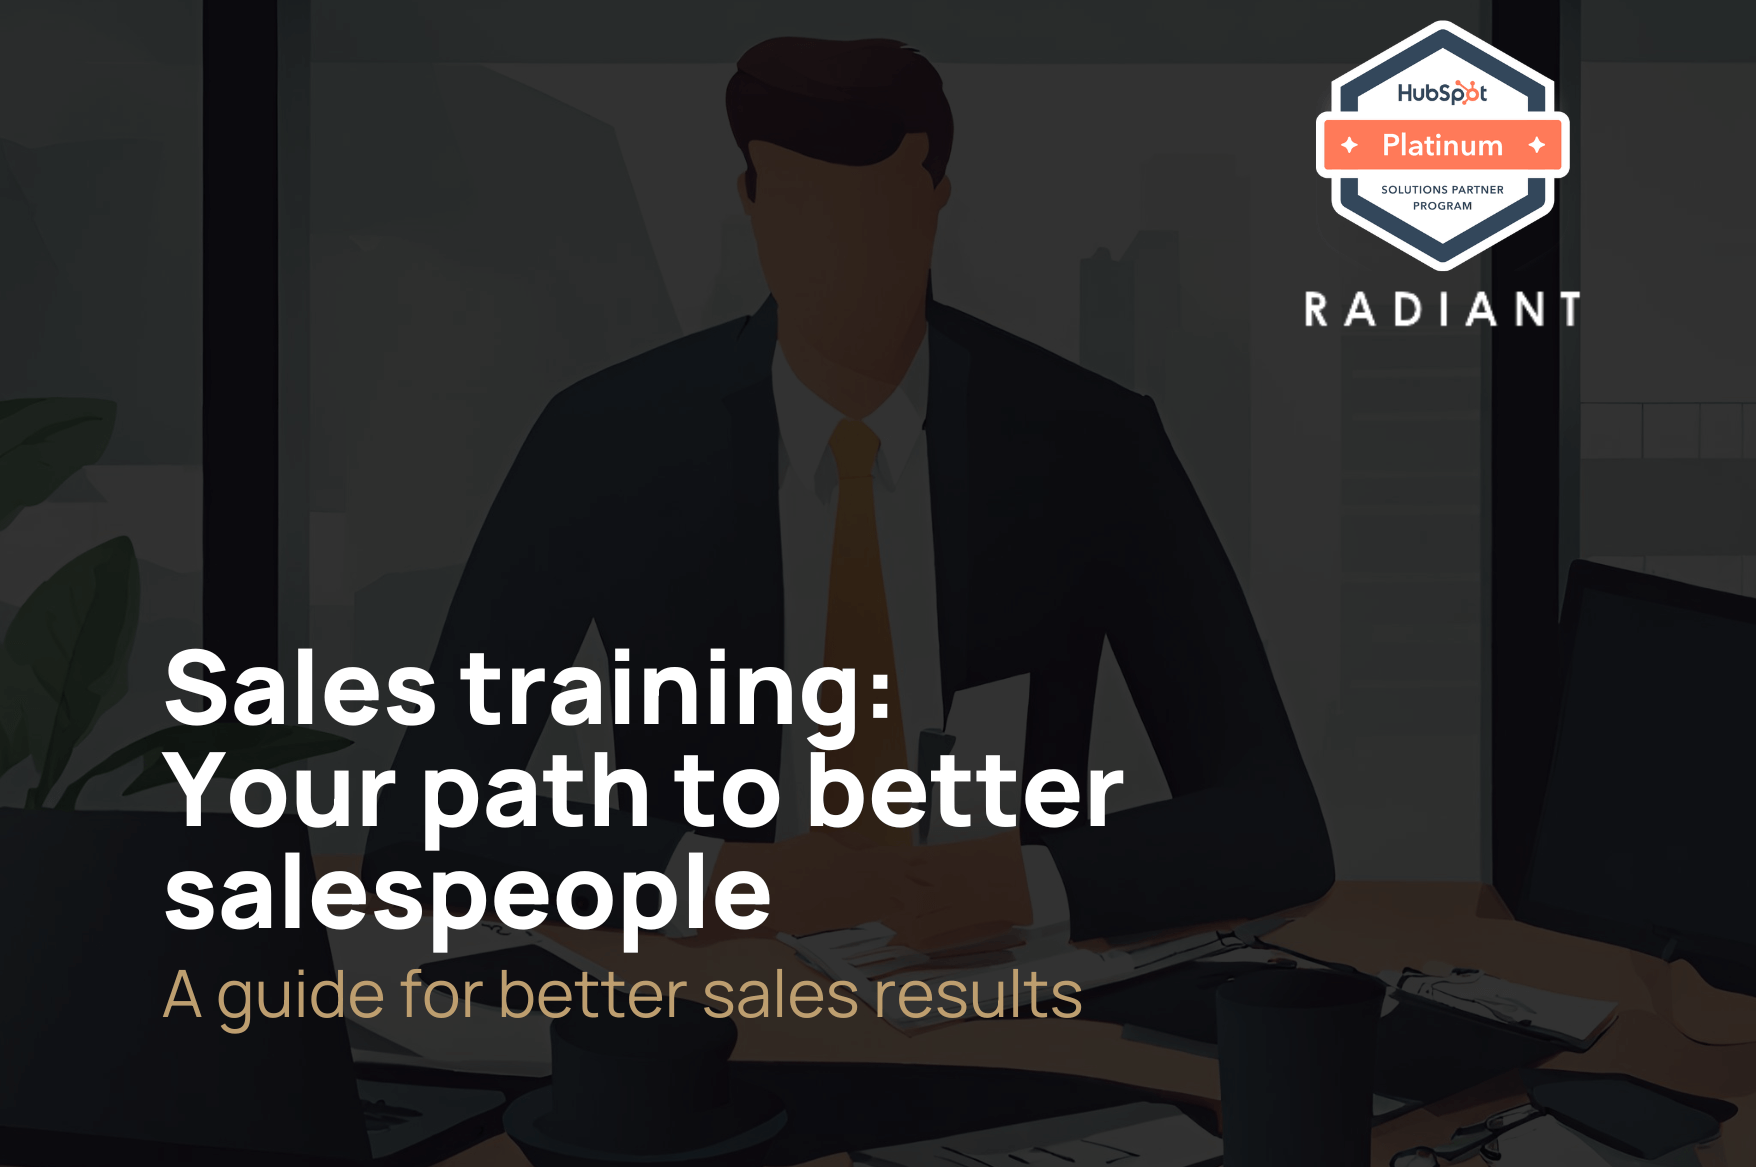 Sales training: Your path to better salespeople